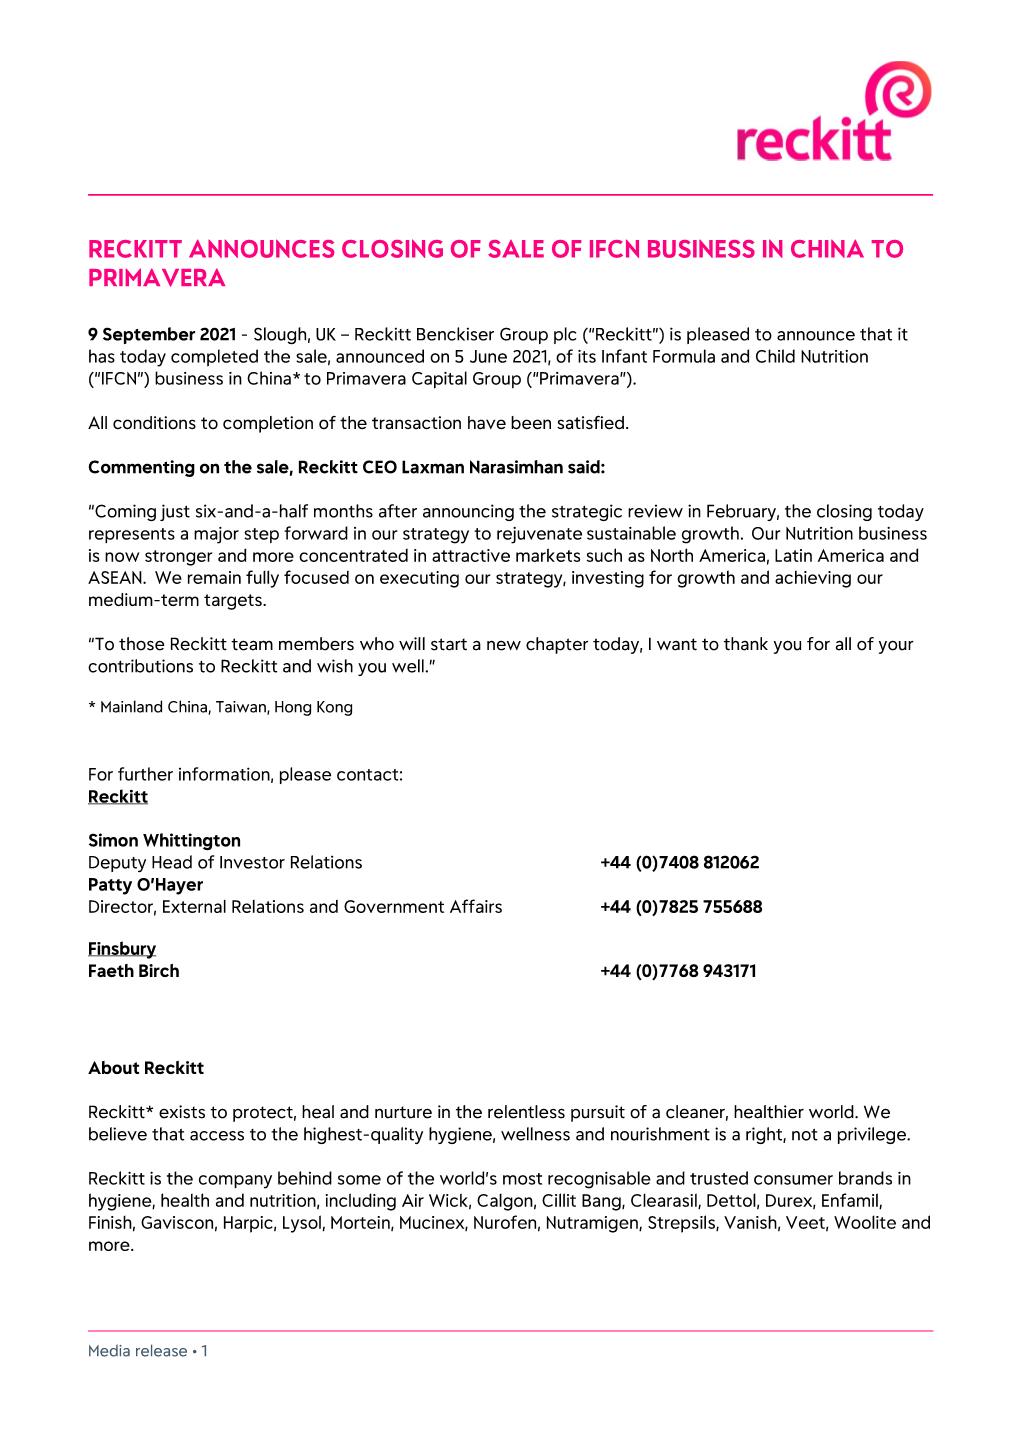 Reckitt Announces Closing of Sale of Ifcn Business in China to Primavera